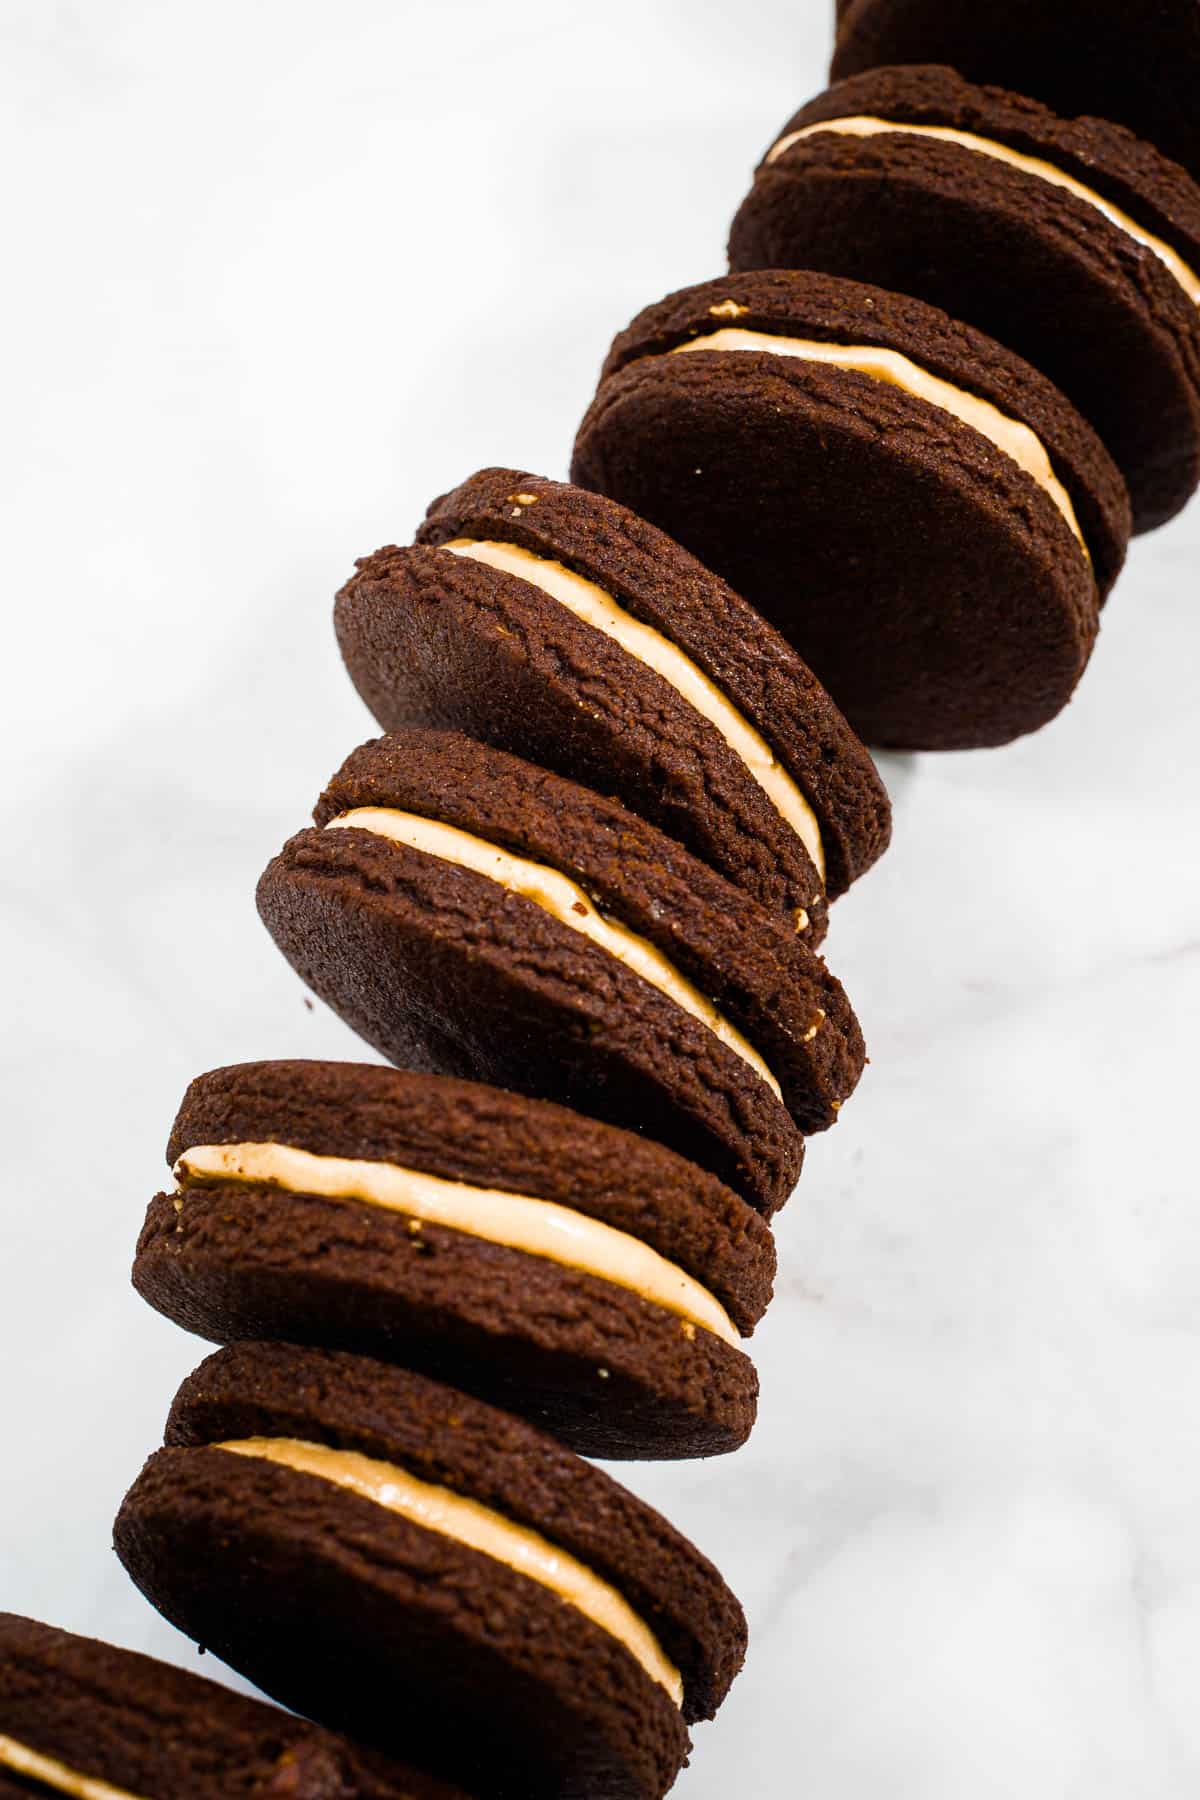 Chocolate sandwich cookies with peanut butter centers